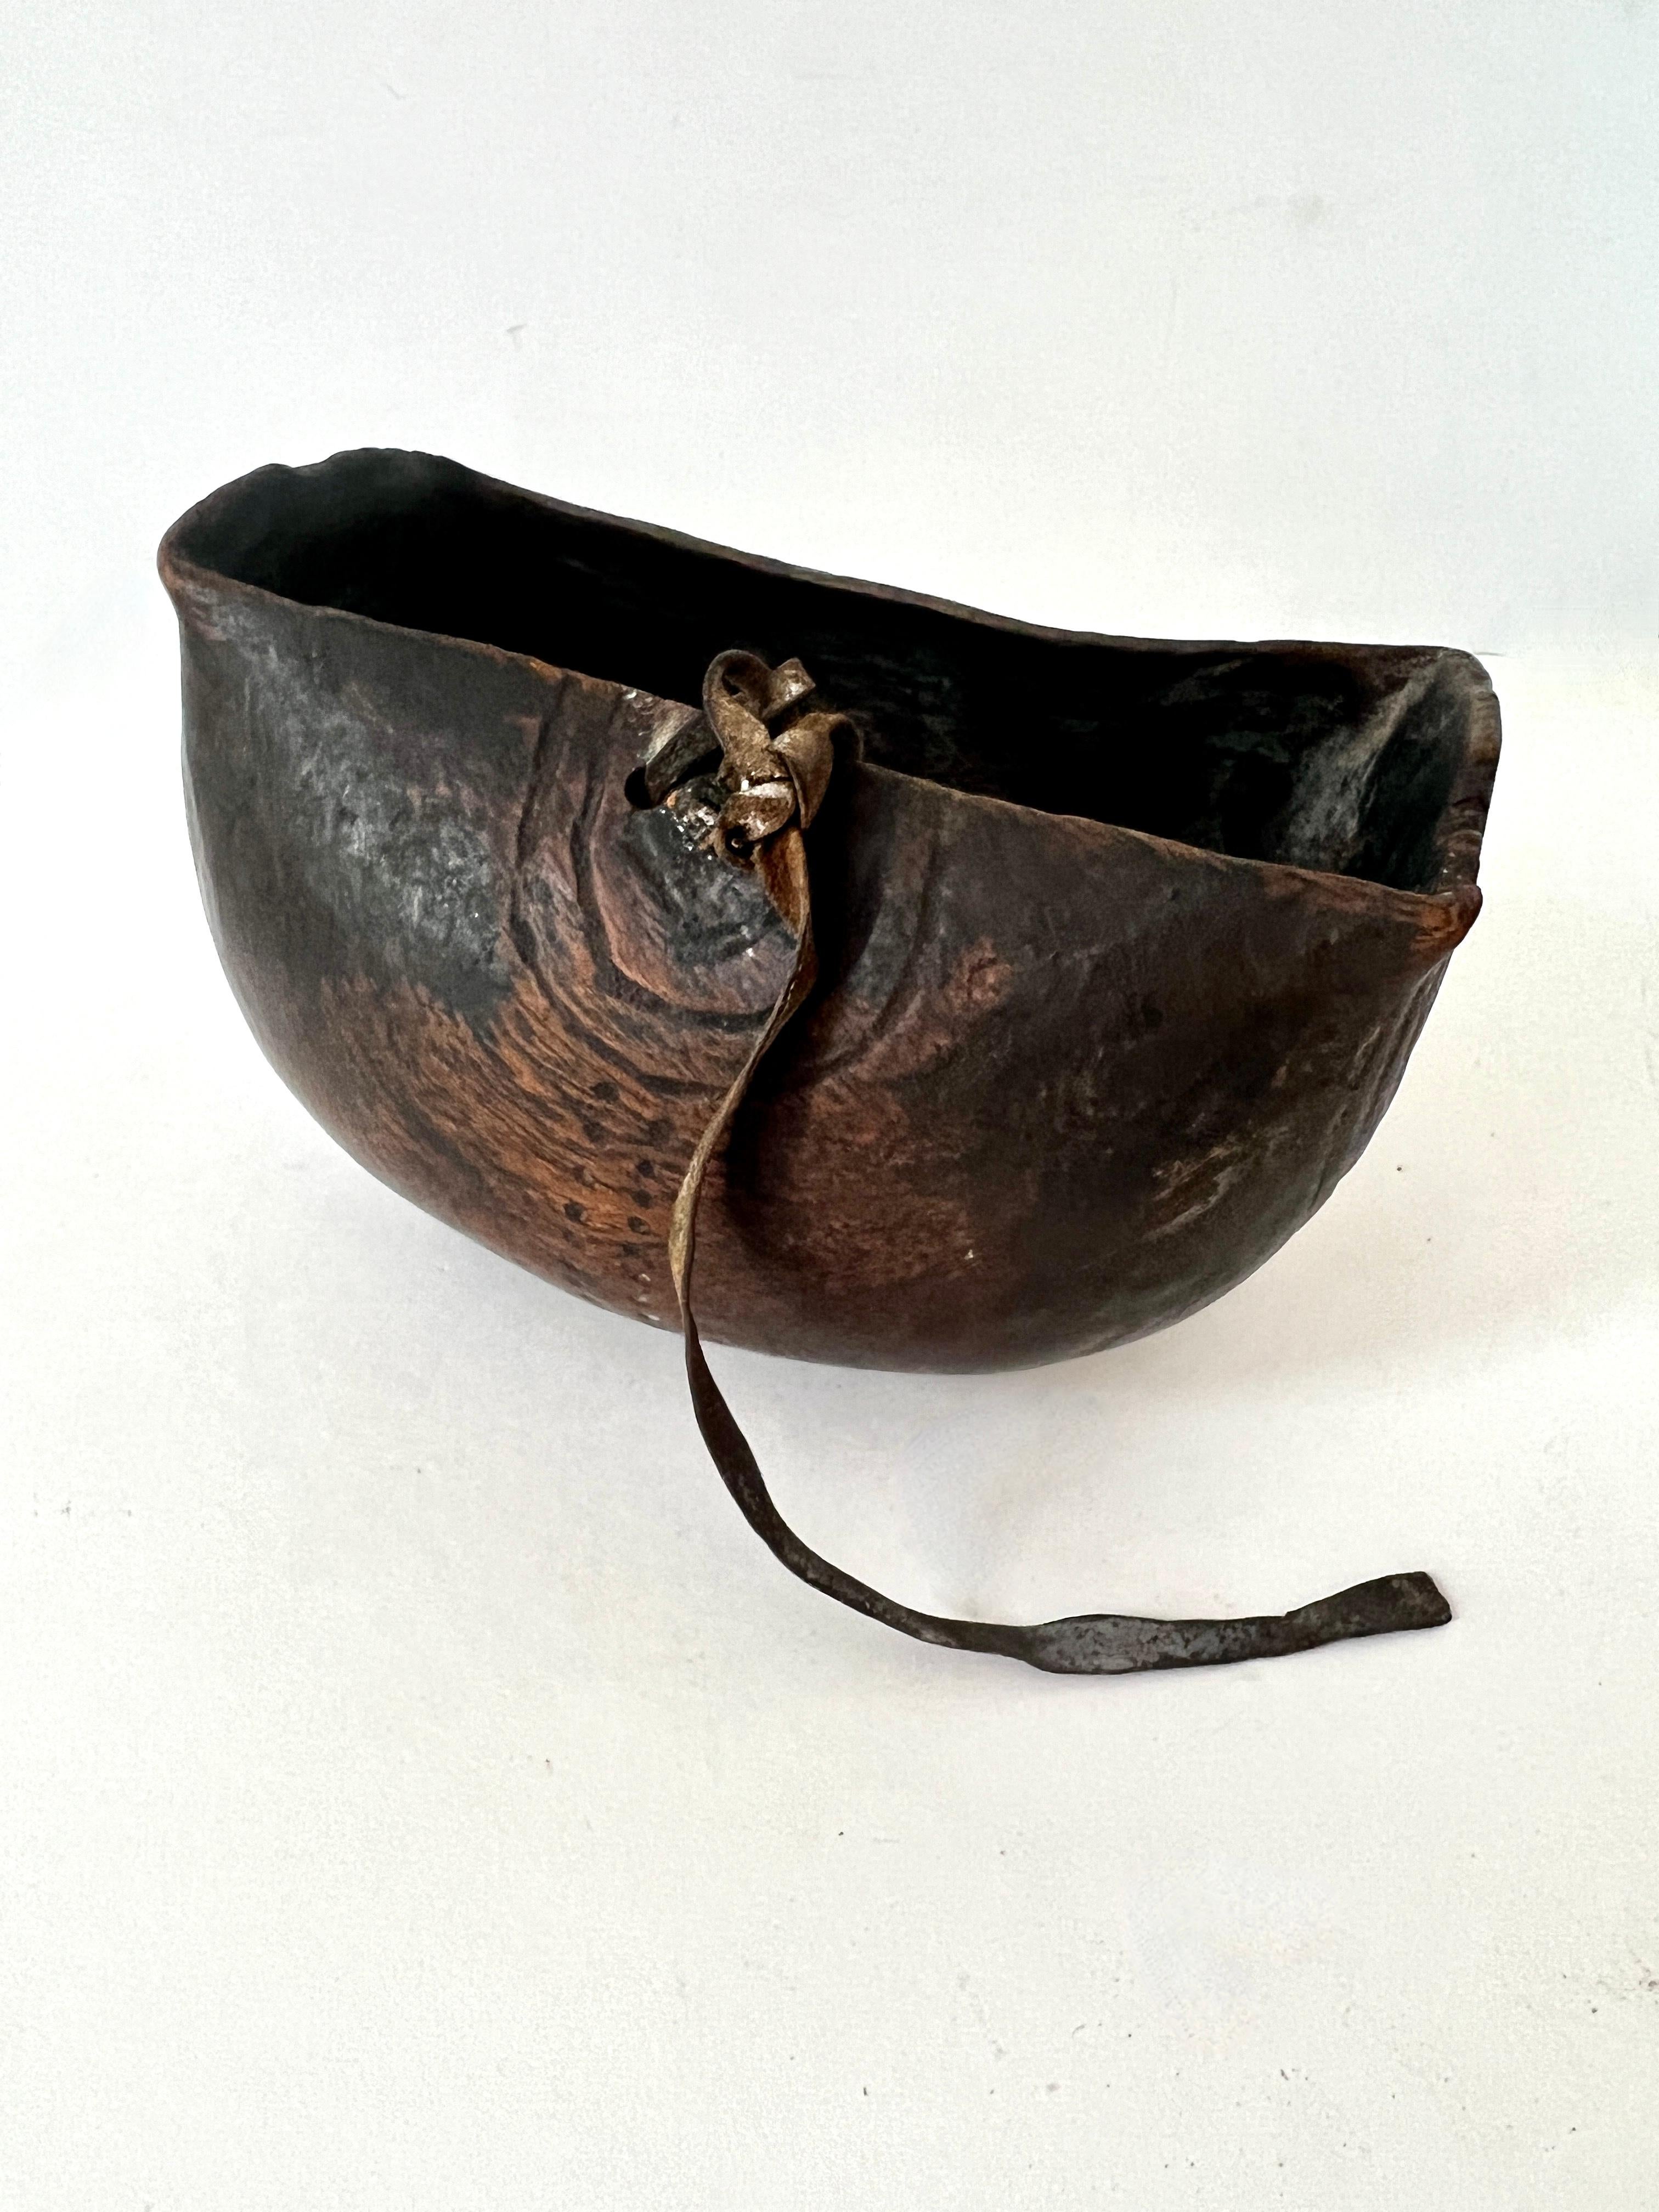 Hand-crafted and Hand-made in Africa.  The bowl is rare and beautiful, an art to transform the piece into this lovely town with etchings and leather strap - the design and African design are wonderful making each piece a one of a kind by the